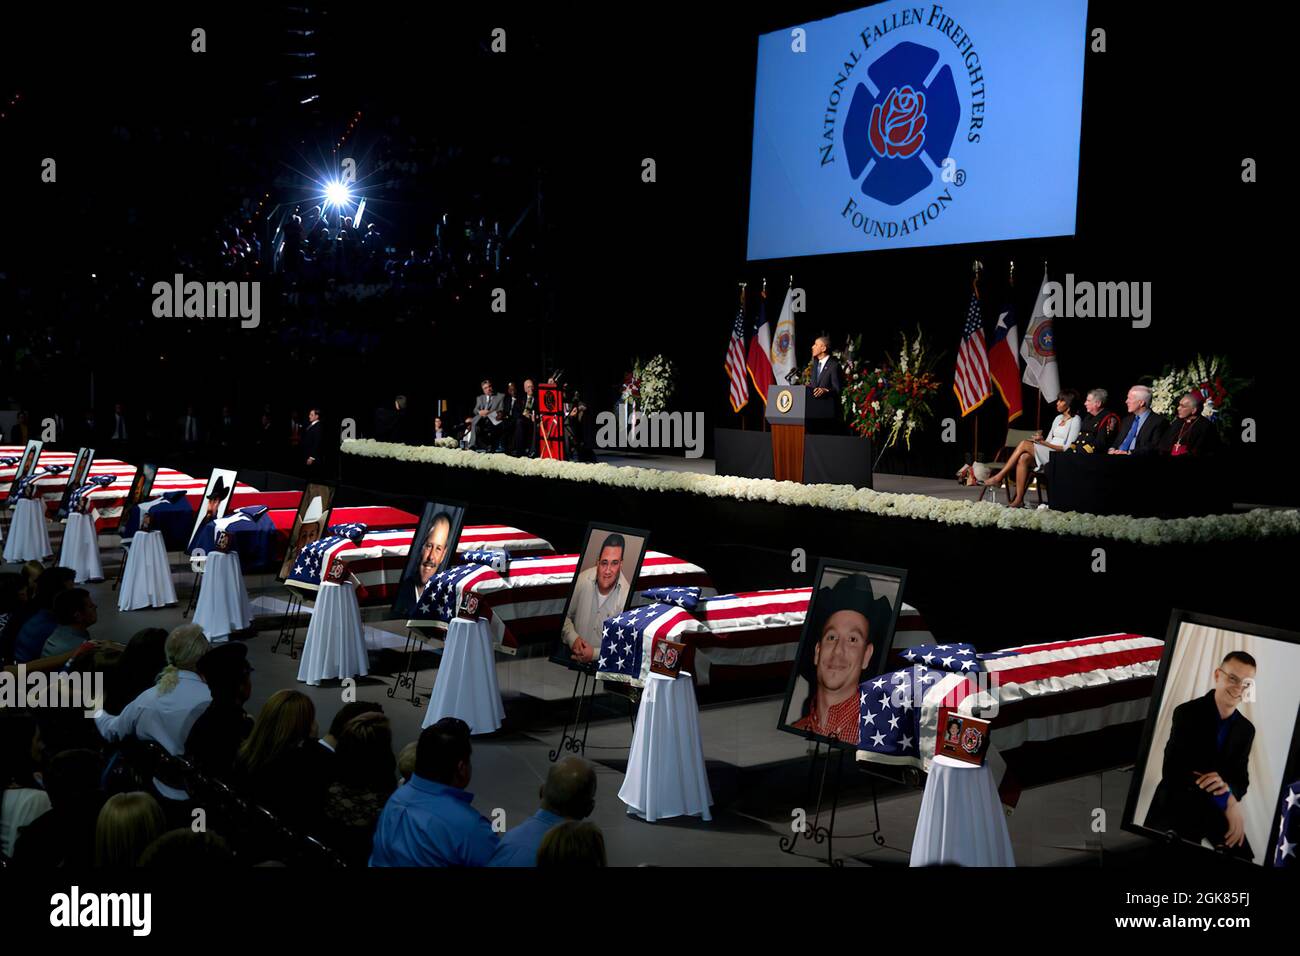 April 25, 2013'The President and First Lady attend a memorial service in Waco, Texas, for the firefighters and first responders who died at a fertilizer plant explosion the week before In West, Texas. A day that began with laughter at the Bush Presidential Library ended in tears as the Obamas also met privately with the families who lost loved ones.'   (Official White House Photo by Pete Souza)  This official White House photograph is being made available only for publication by news organizations and/or for personal use printing by the subject(s) of the photograph. The photograph may not be m Stock Photo